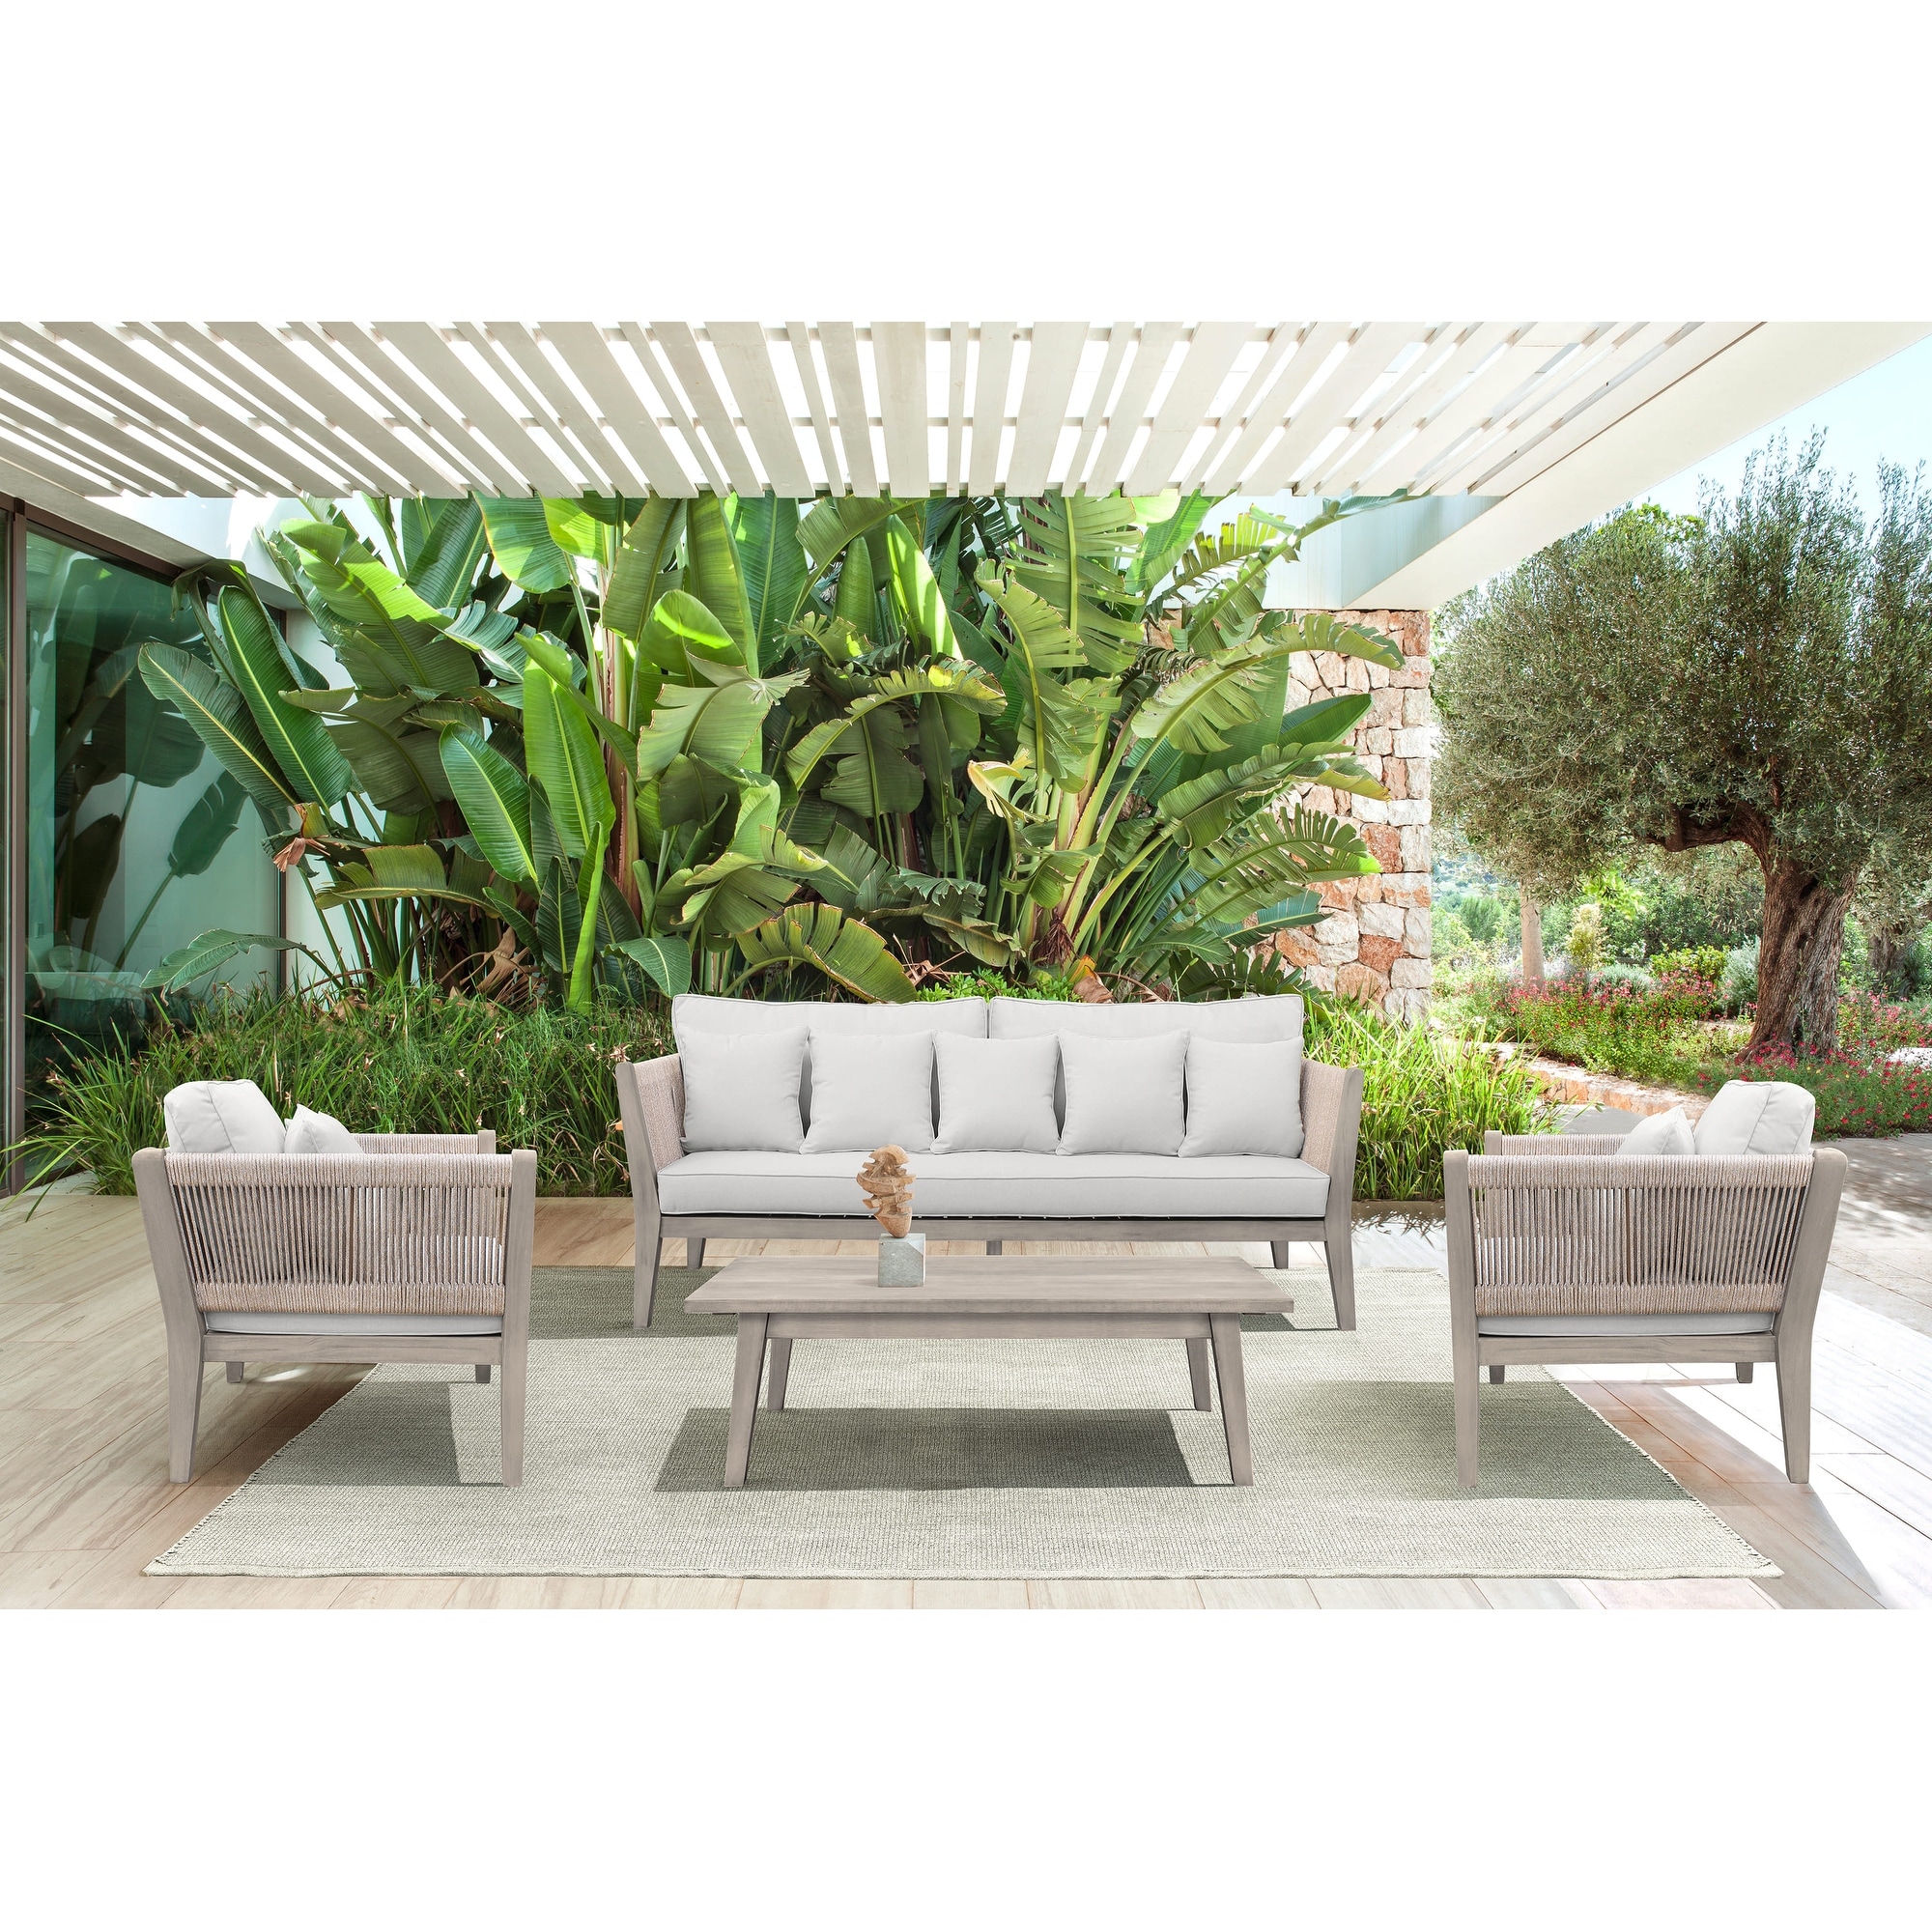 Denia 4 Piece Outdoor Patio Furniture Set In Acacia Wood And Rope With Dove Cushions